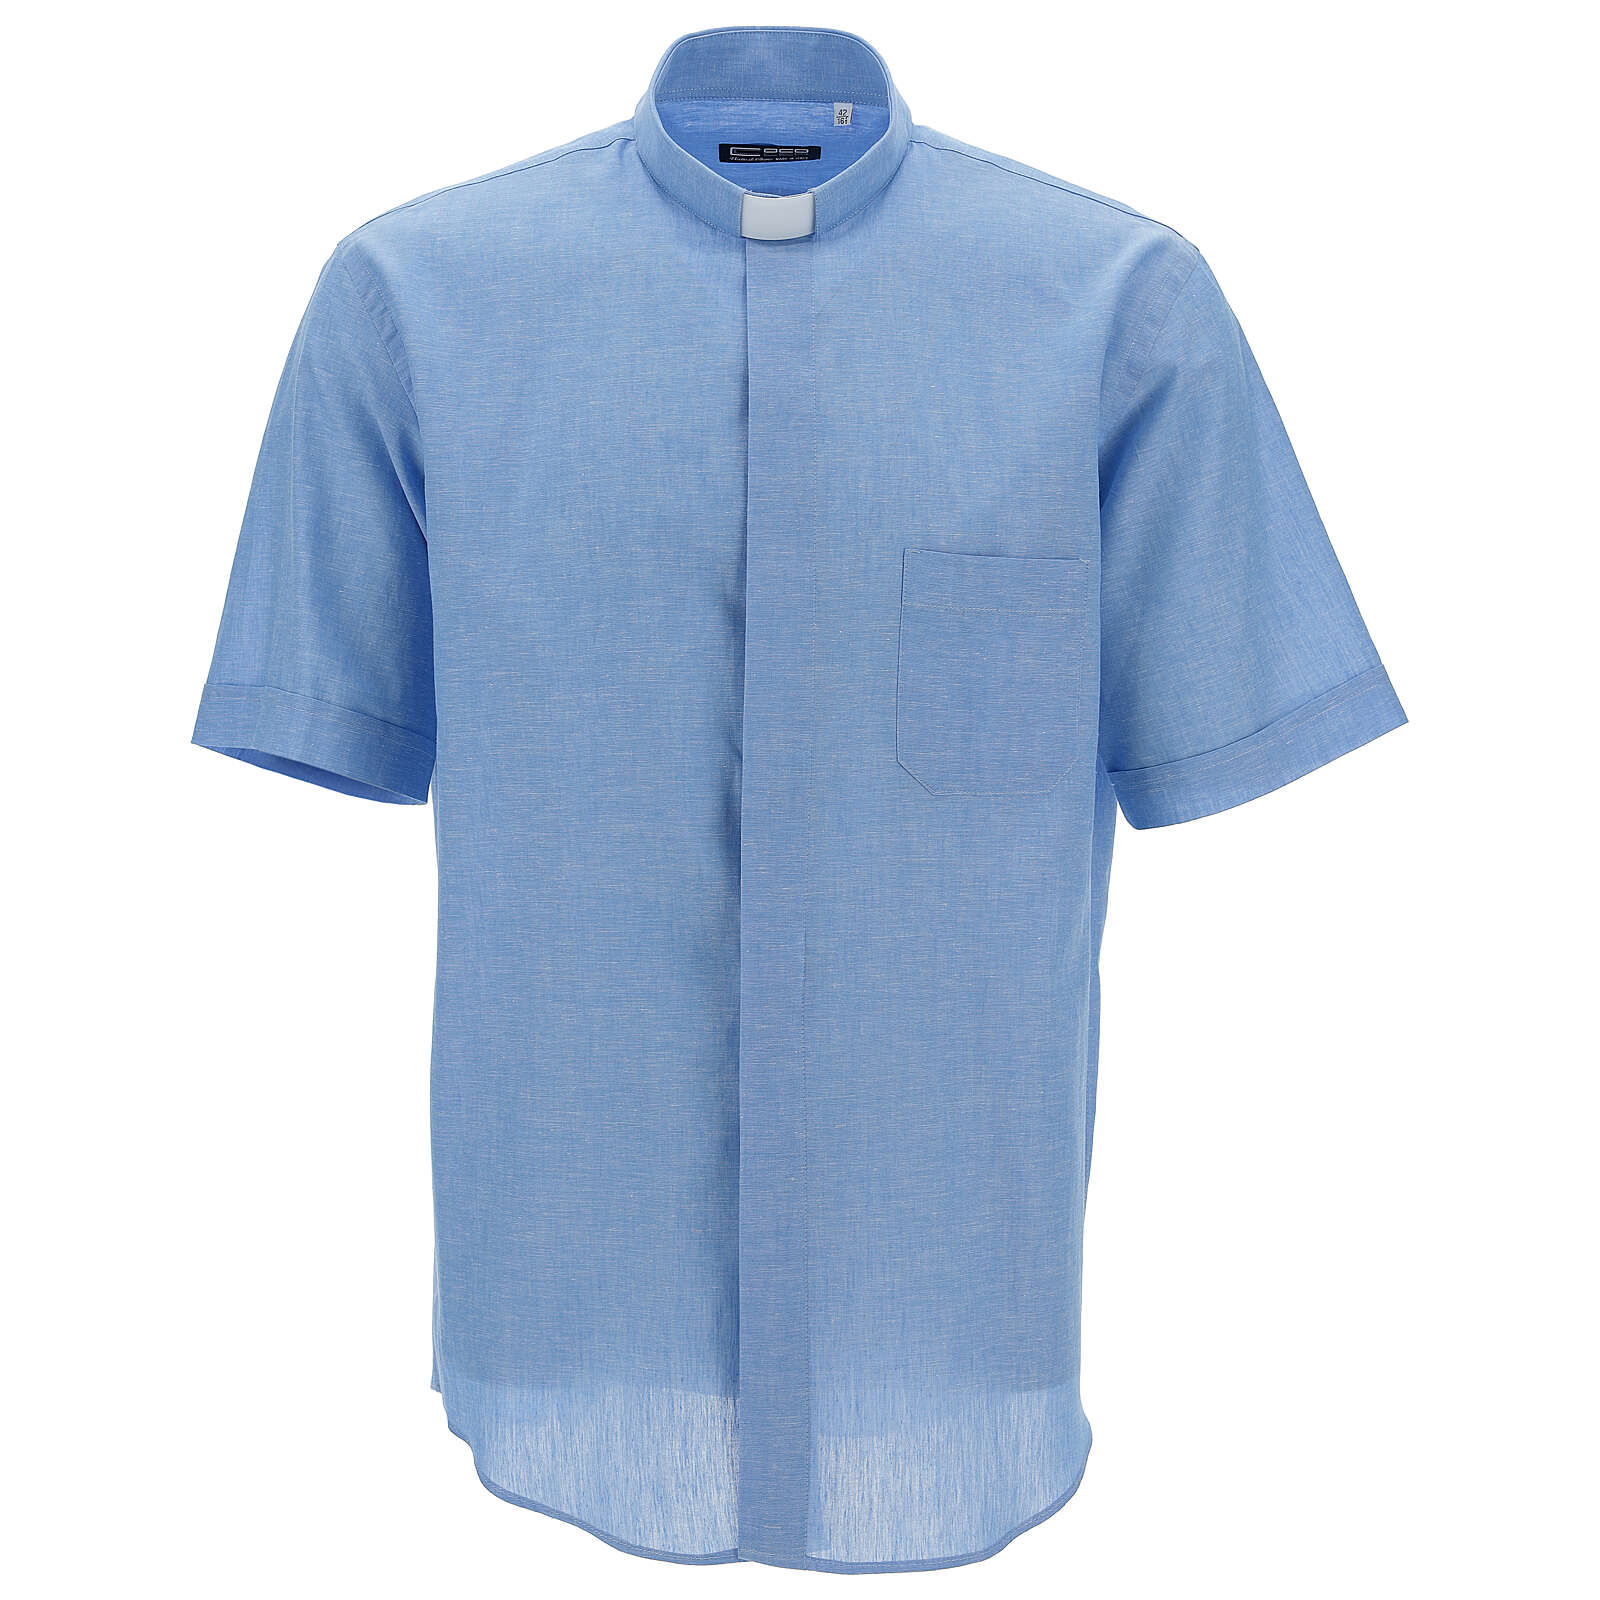 Clergy shirt with short sleeves, light blue linen | online sales on ...